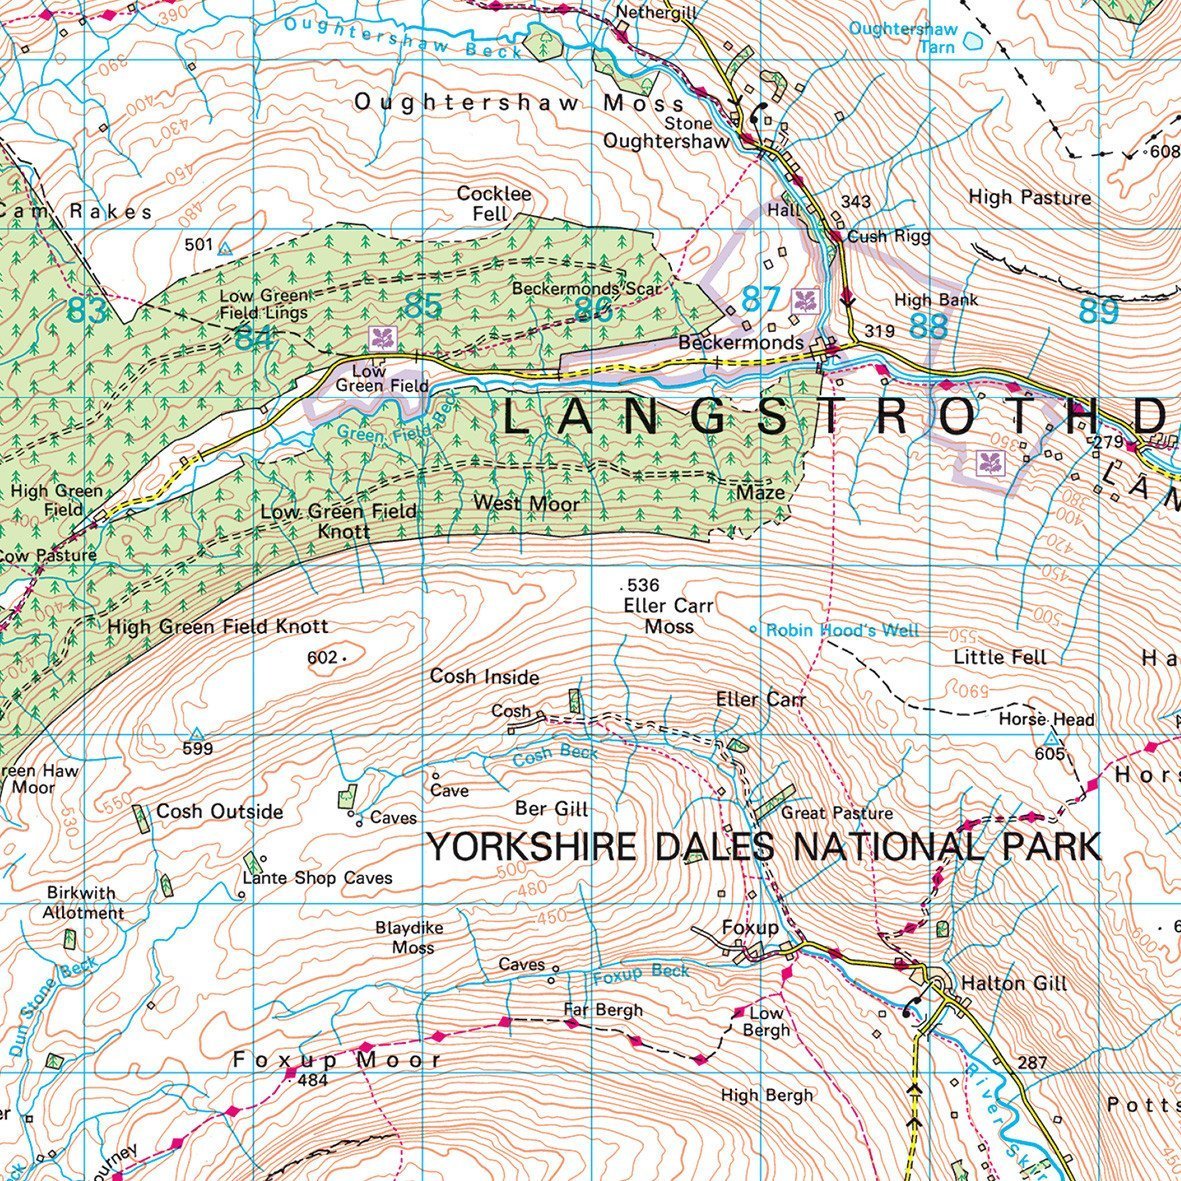 Wall Maps - Yorkshire Dales - UK National Park Wall Map